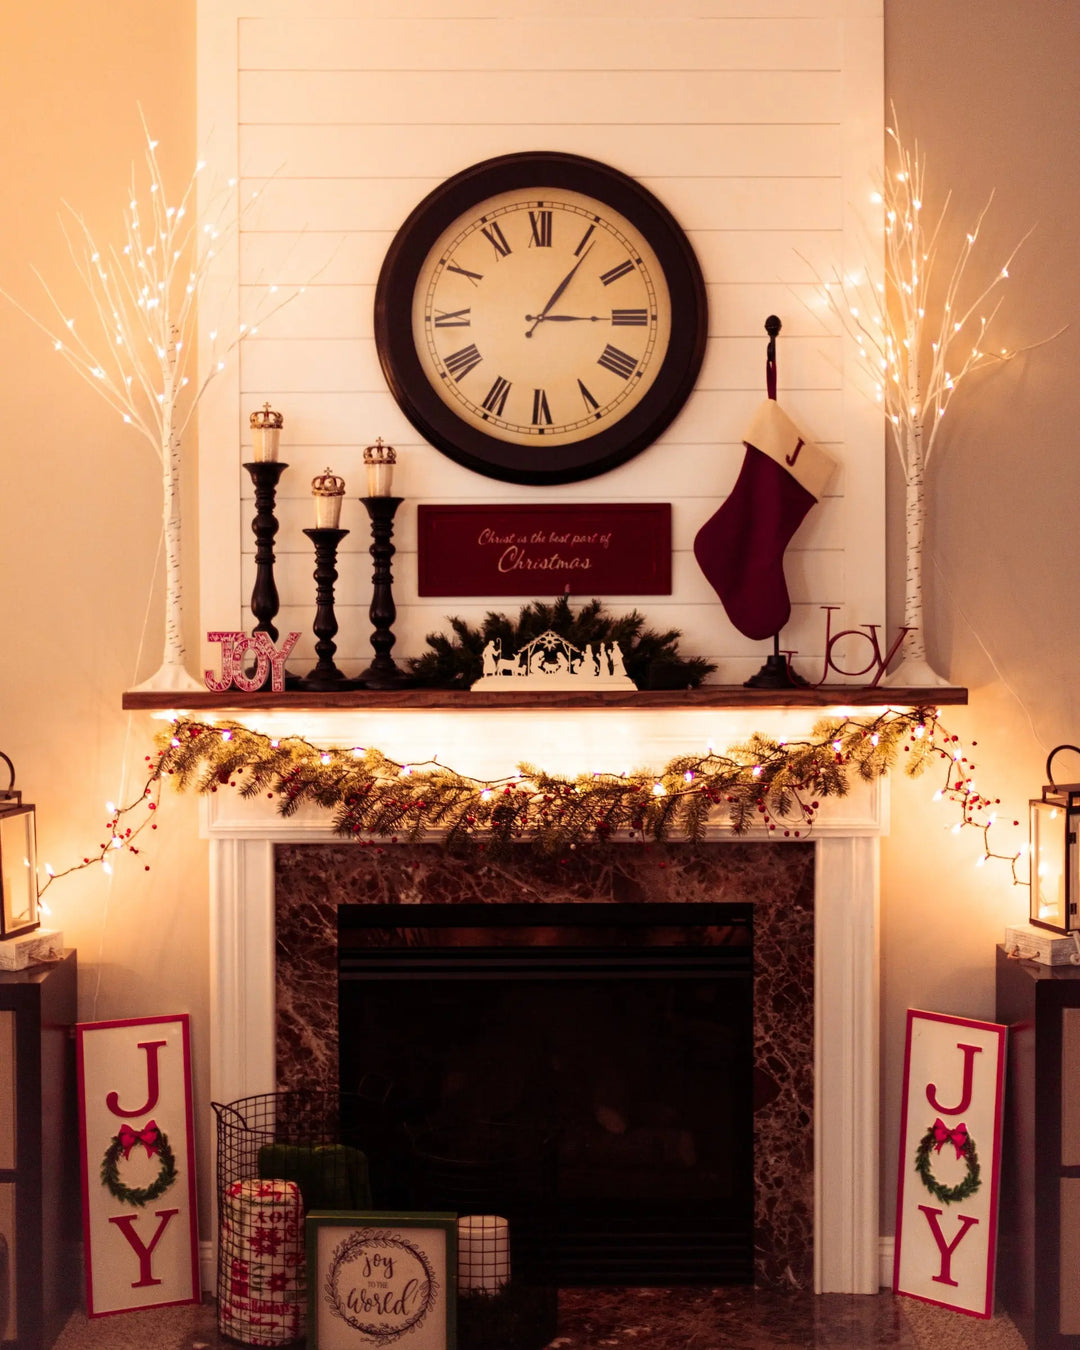 Create A Festive Atmosphere With These Christmas Decor Ideas - Bestier